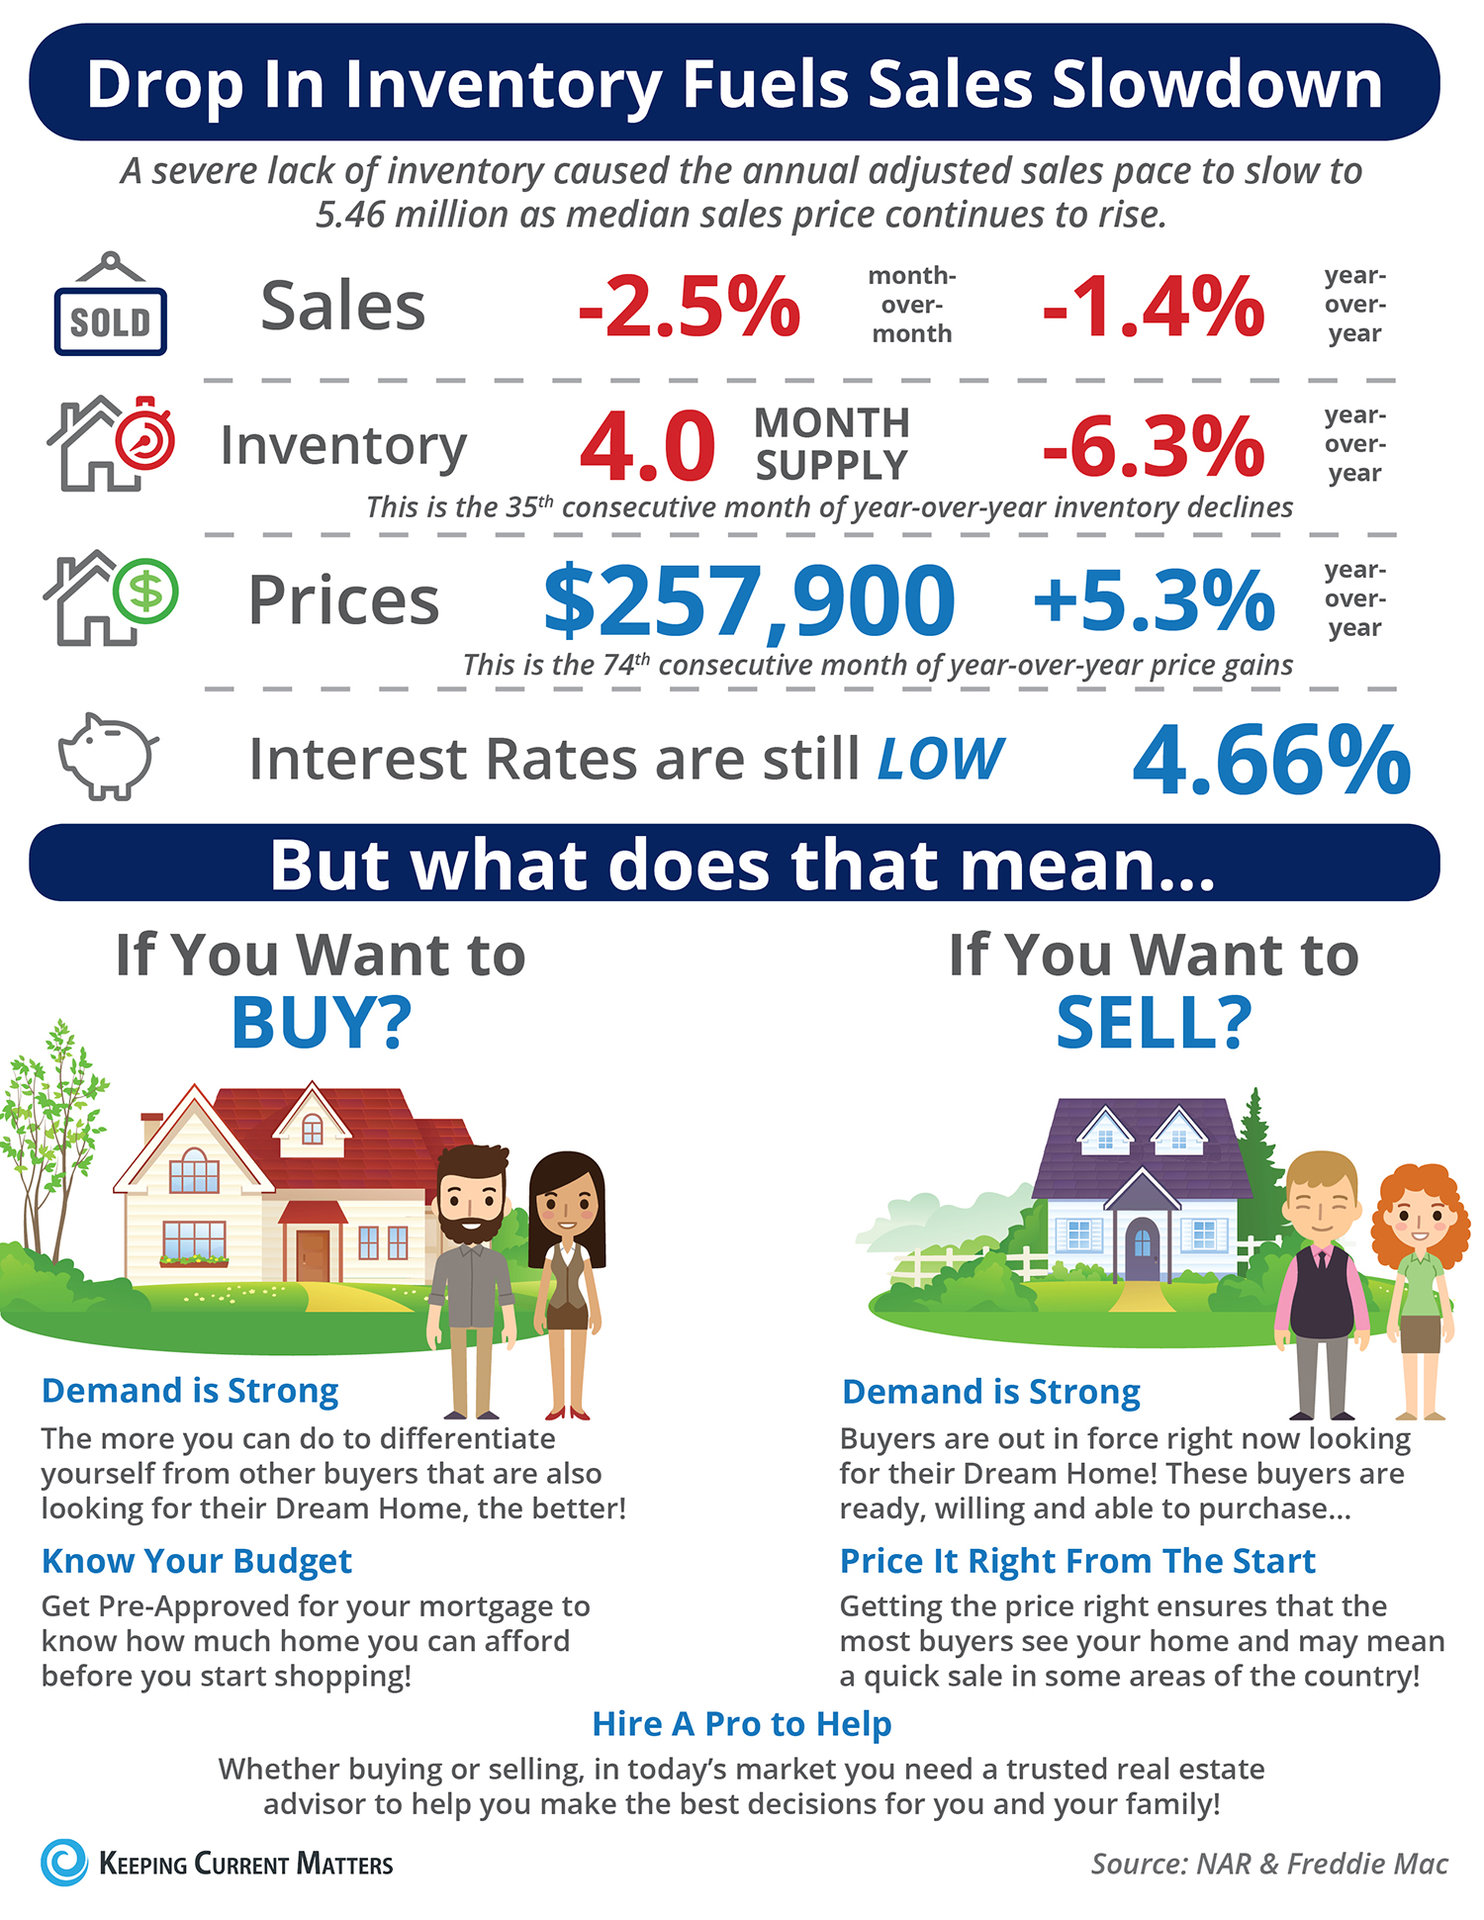 Drop in Inventory Fuels Sales Slowdown [INFOGRAPHIC] | Keeping Current Matters